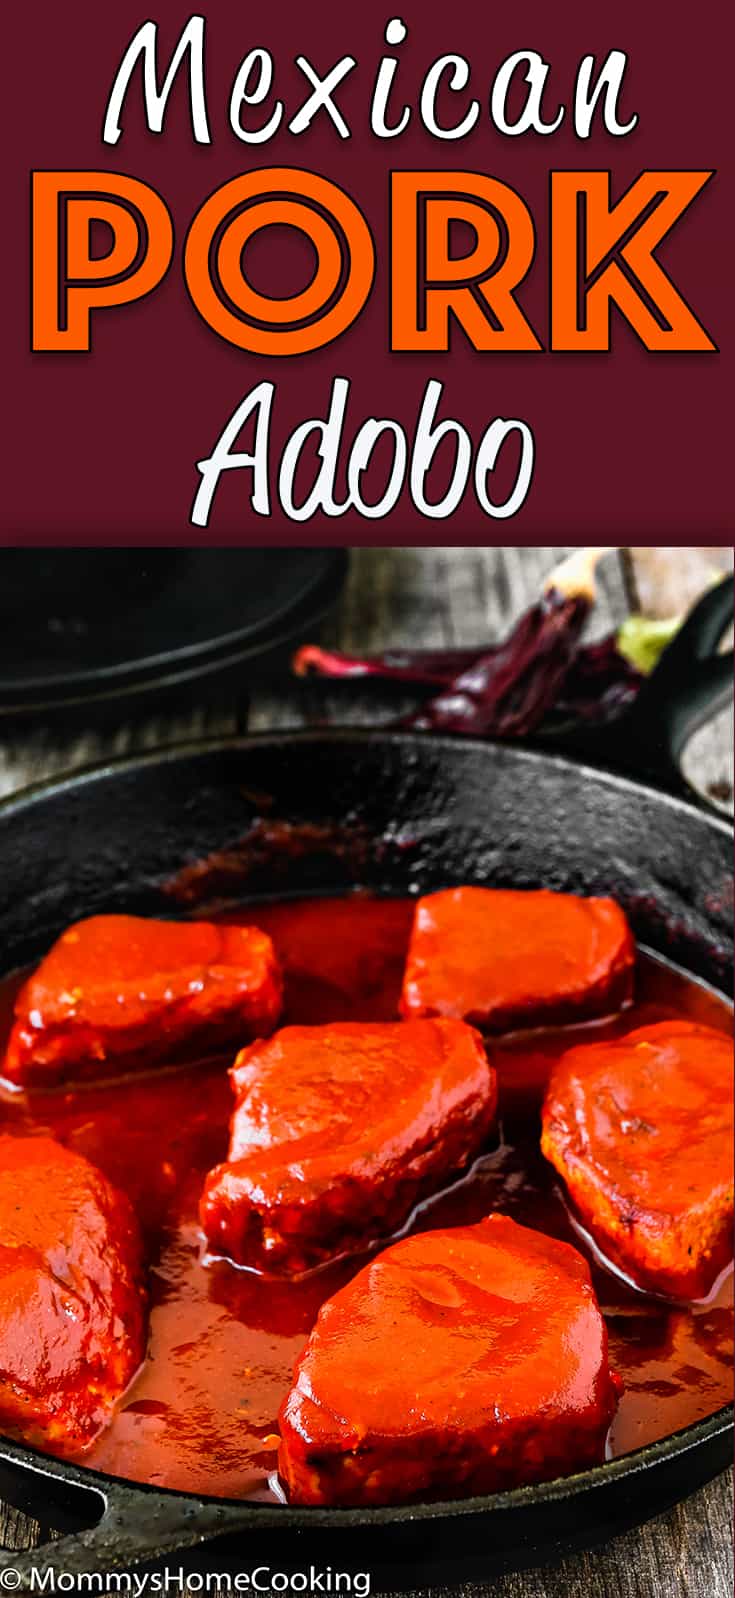 Spice up your Mexican recipes repertoire with this Mexican Pork Tenderloin Adobo! It's easy to make and super flavorful. Perfect for a Mexican-themed party or for an out of the ordinary dinner. https://mommyshomecooking.com